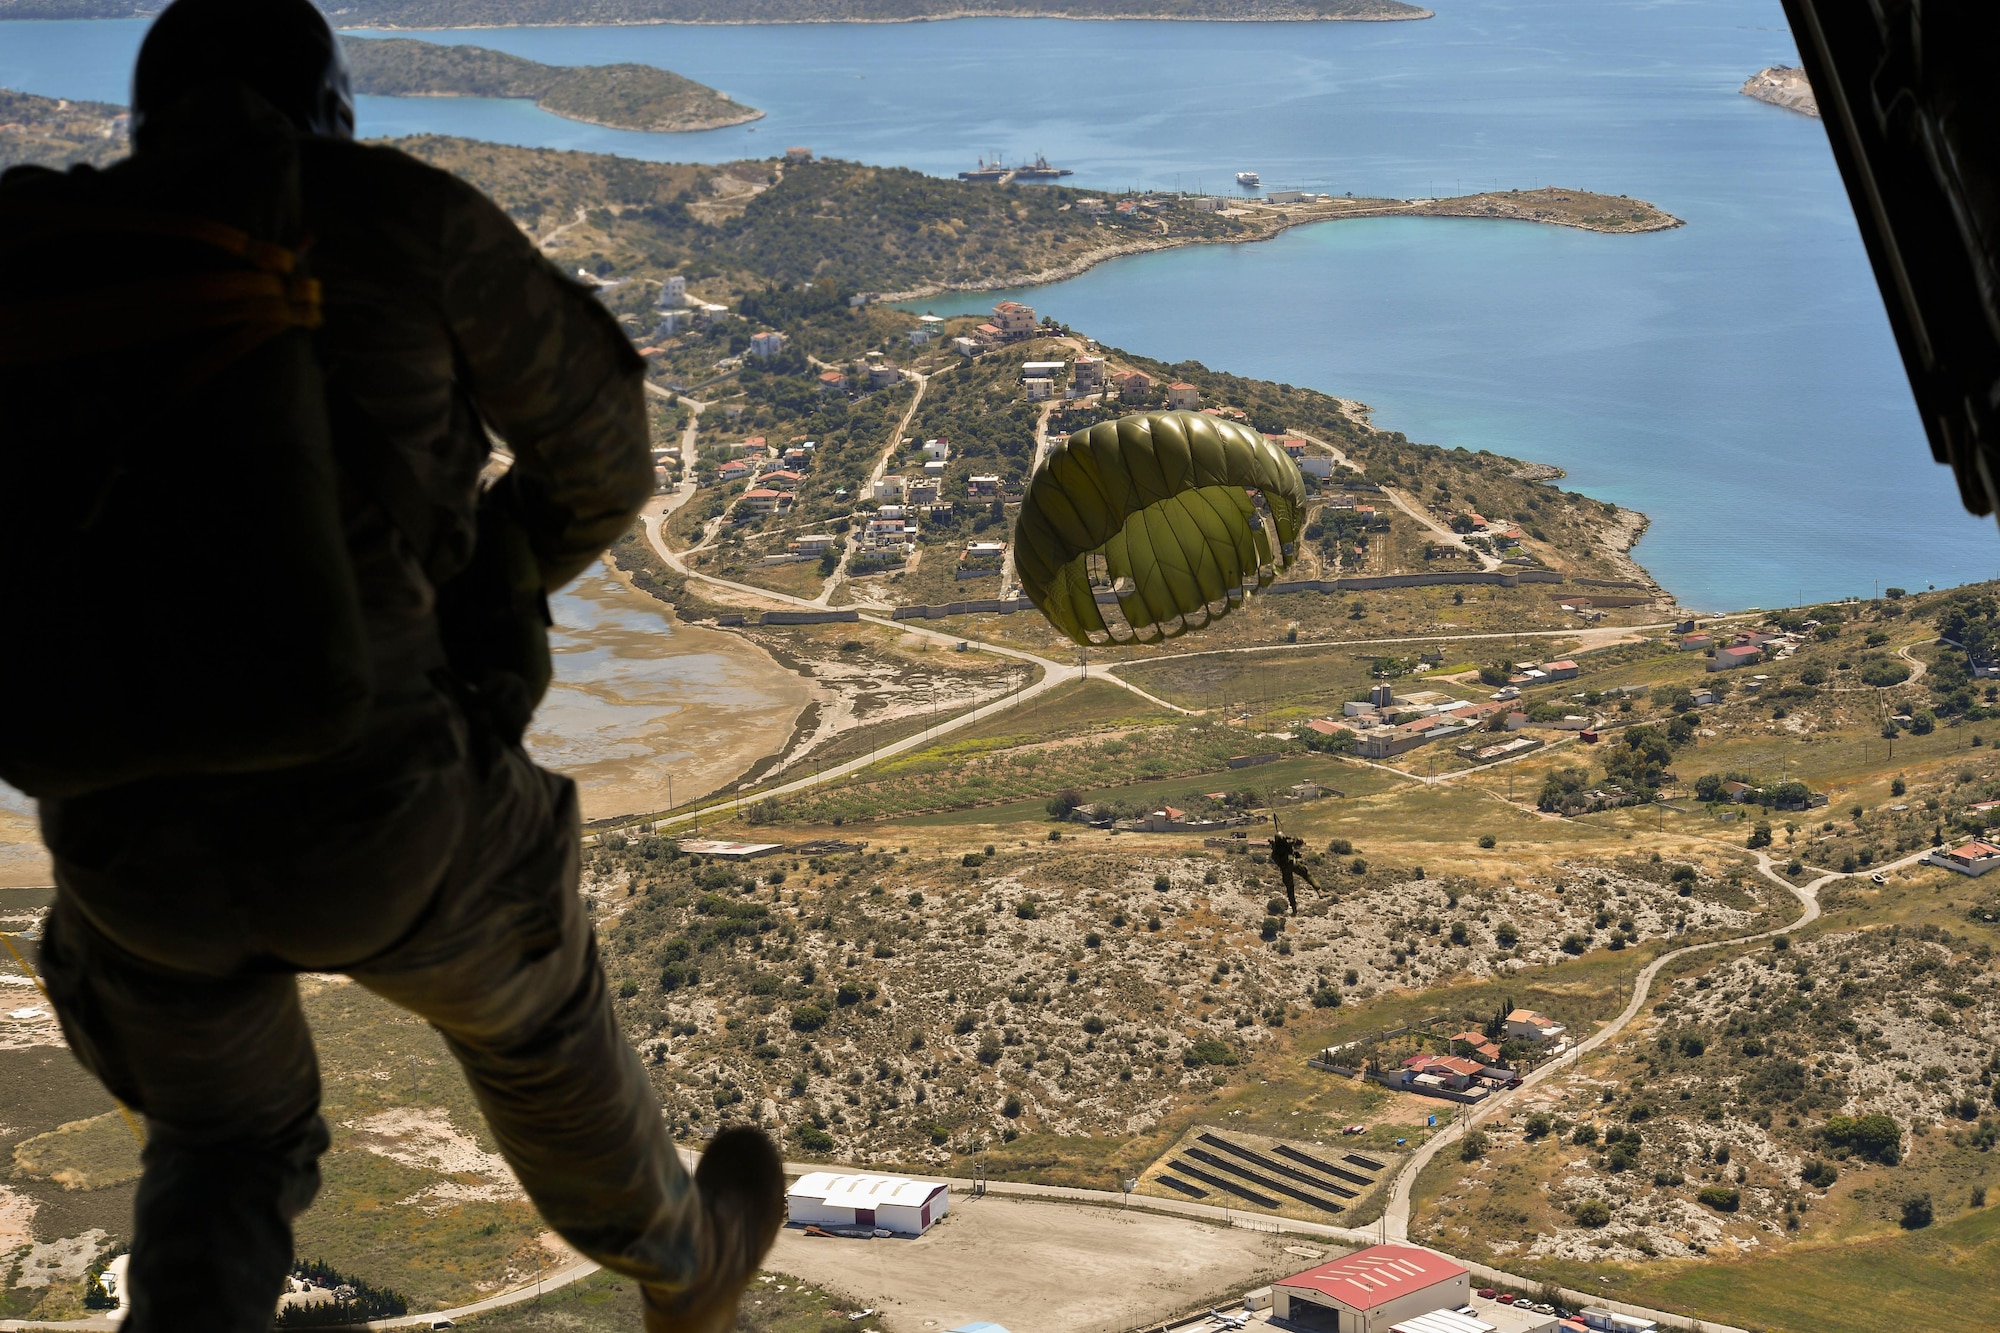 A Greek paratrooper conducts a military free-fall jump from a U.S. Air Force C-130J Super Hercules during Exercise Stolen Cerberus IV above Megara, Greece, April 26, 2017. Throughout the exercise, 265 Greek paratroopers conducted static-line and military free-fall jumps form U.S. aircrafts. Combined exercises such as these enhance the interoperability capabilities and skills among allied and partner armed forces. (U.S Air Force photo by Senior Airman Tryphena Mayhugh)